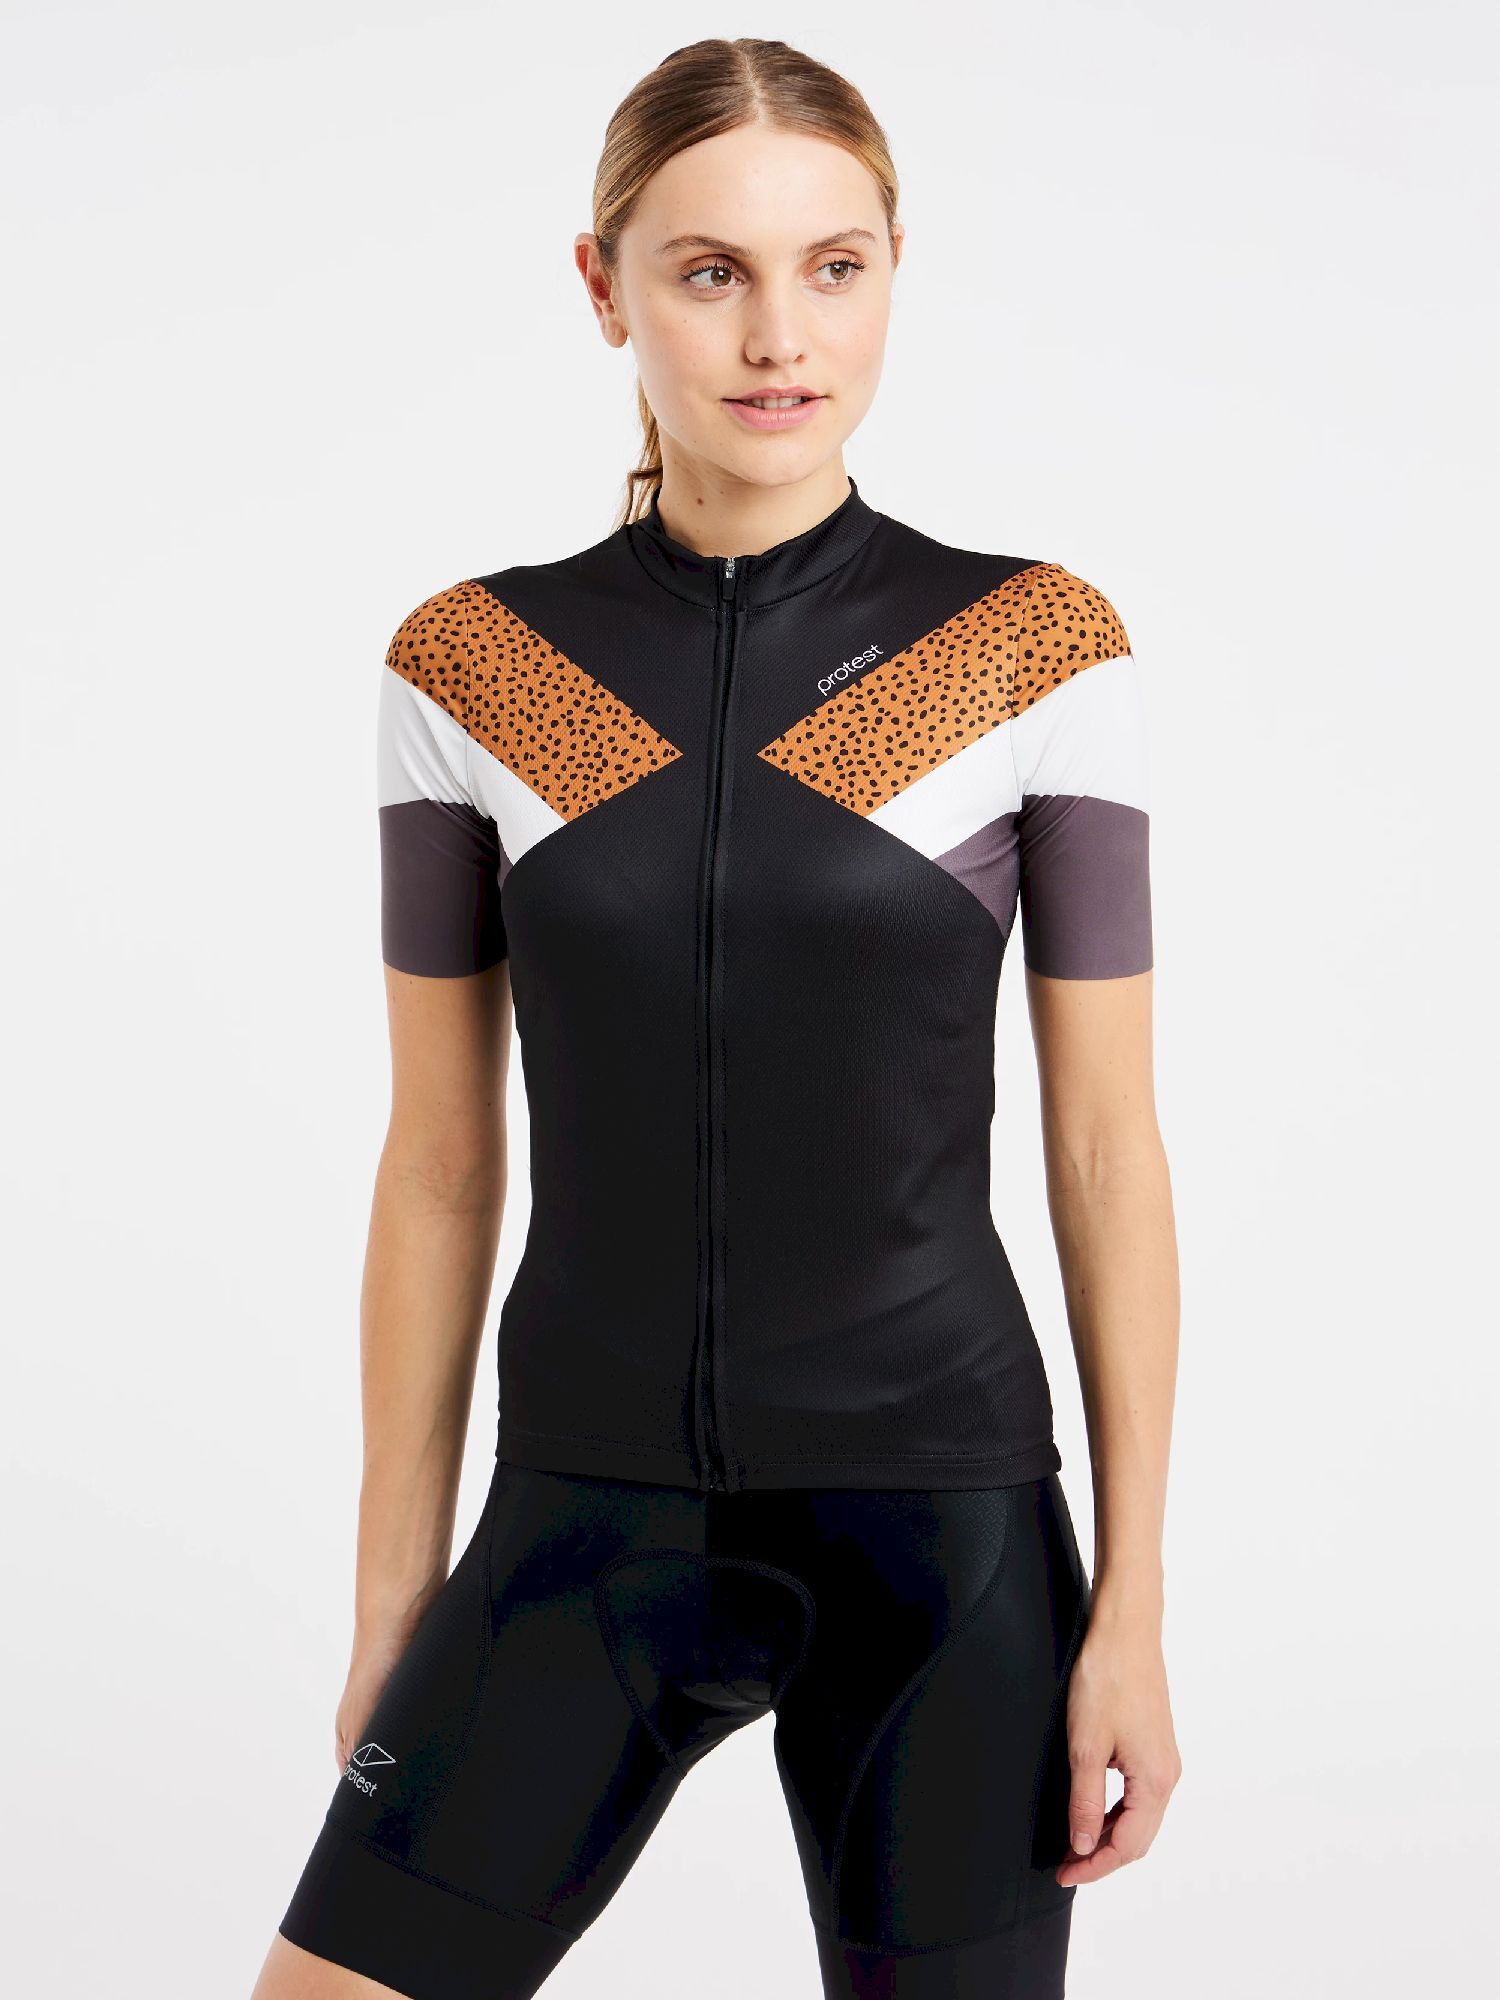 Protest Prtotago - Maillot ciclismo - Mujer | Hardloop